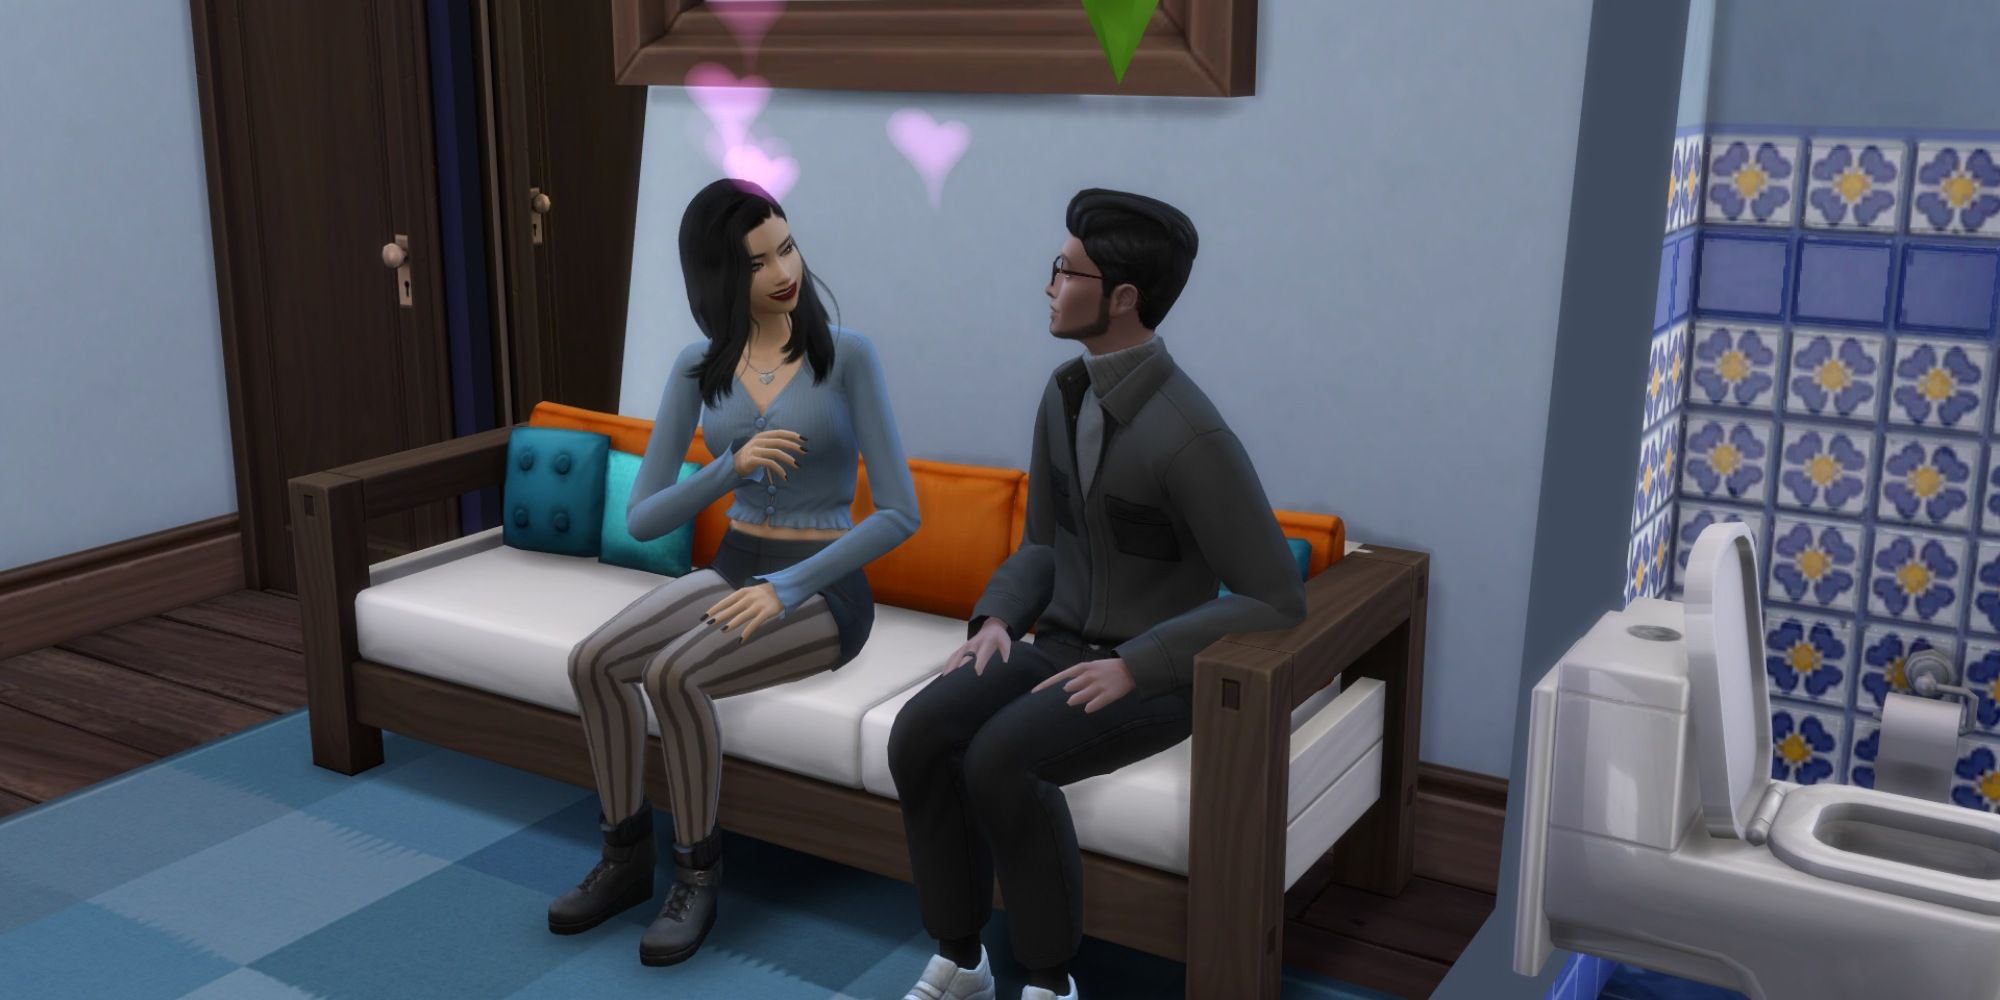 female sim is doing romantic interactions with male sim